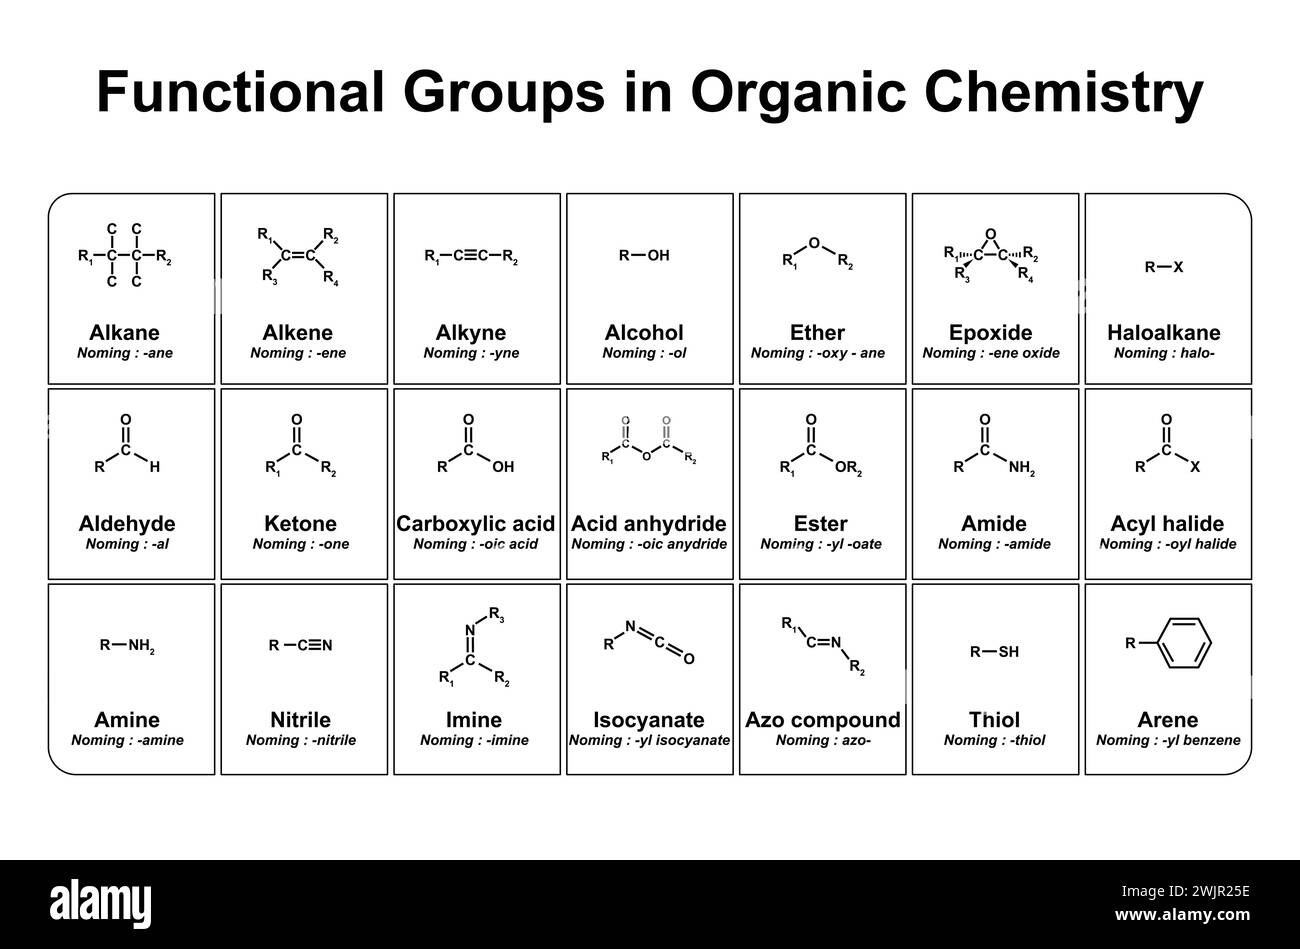 Functional groups in organic chemistry, illustration Stock Photo